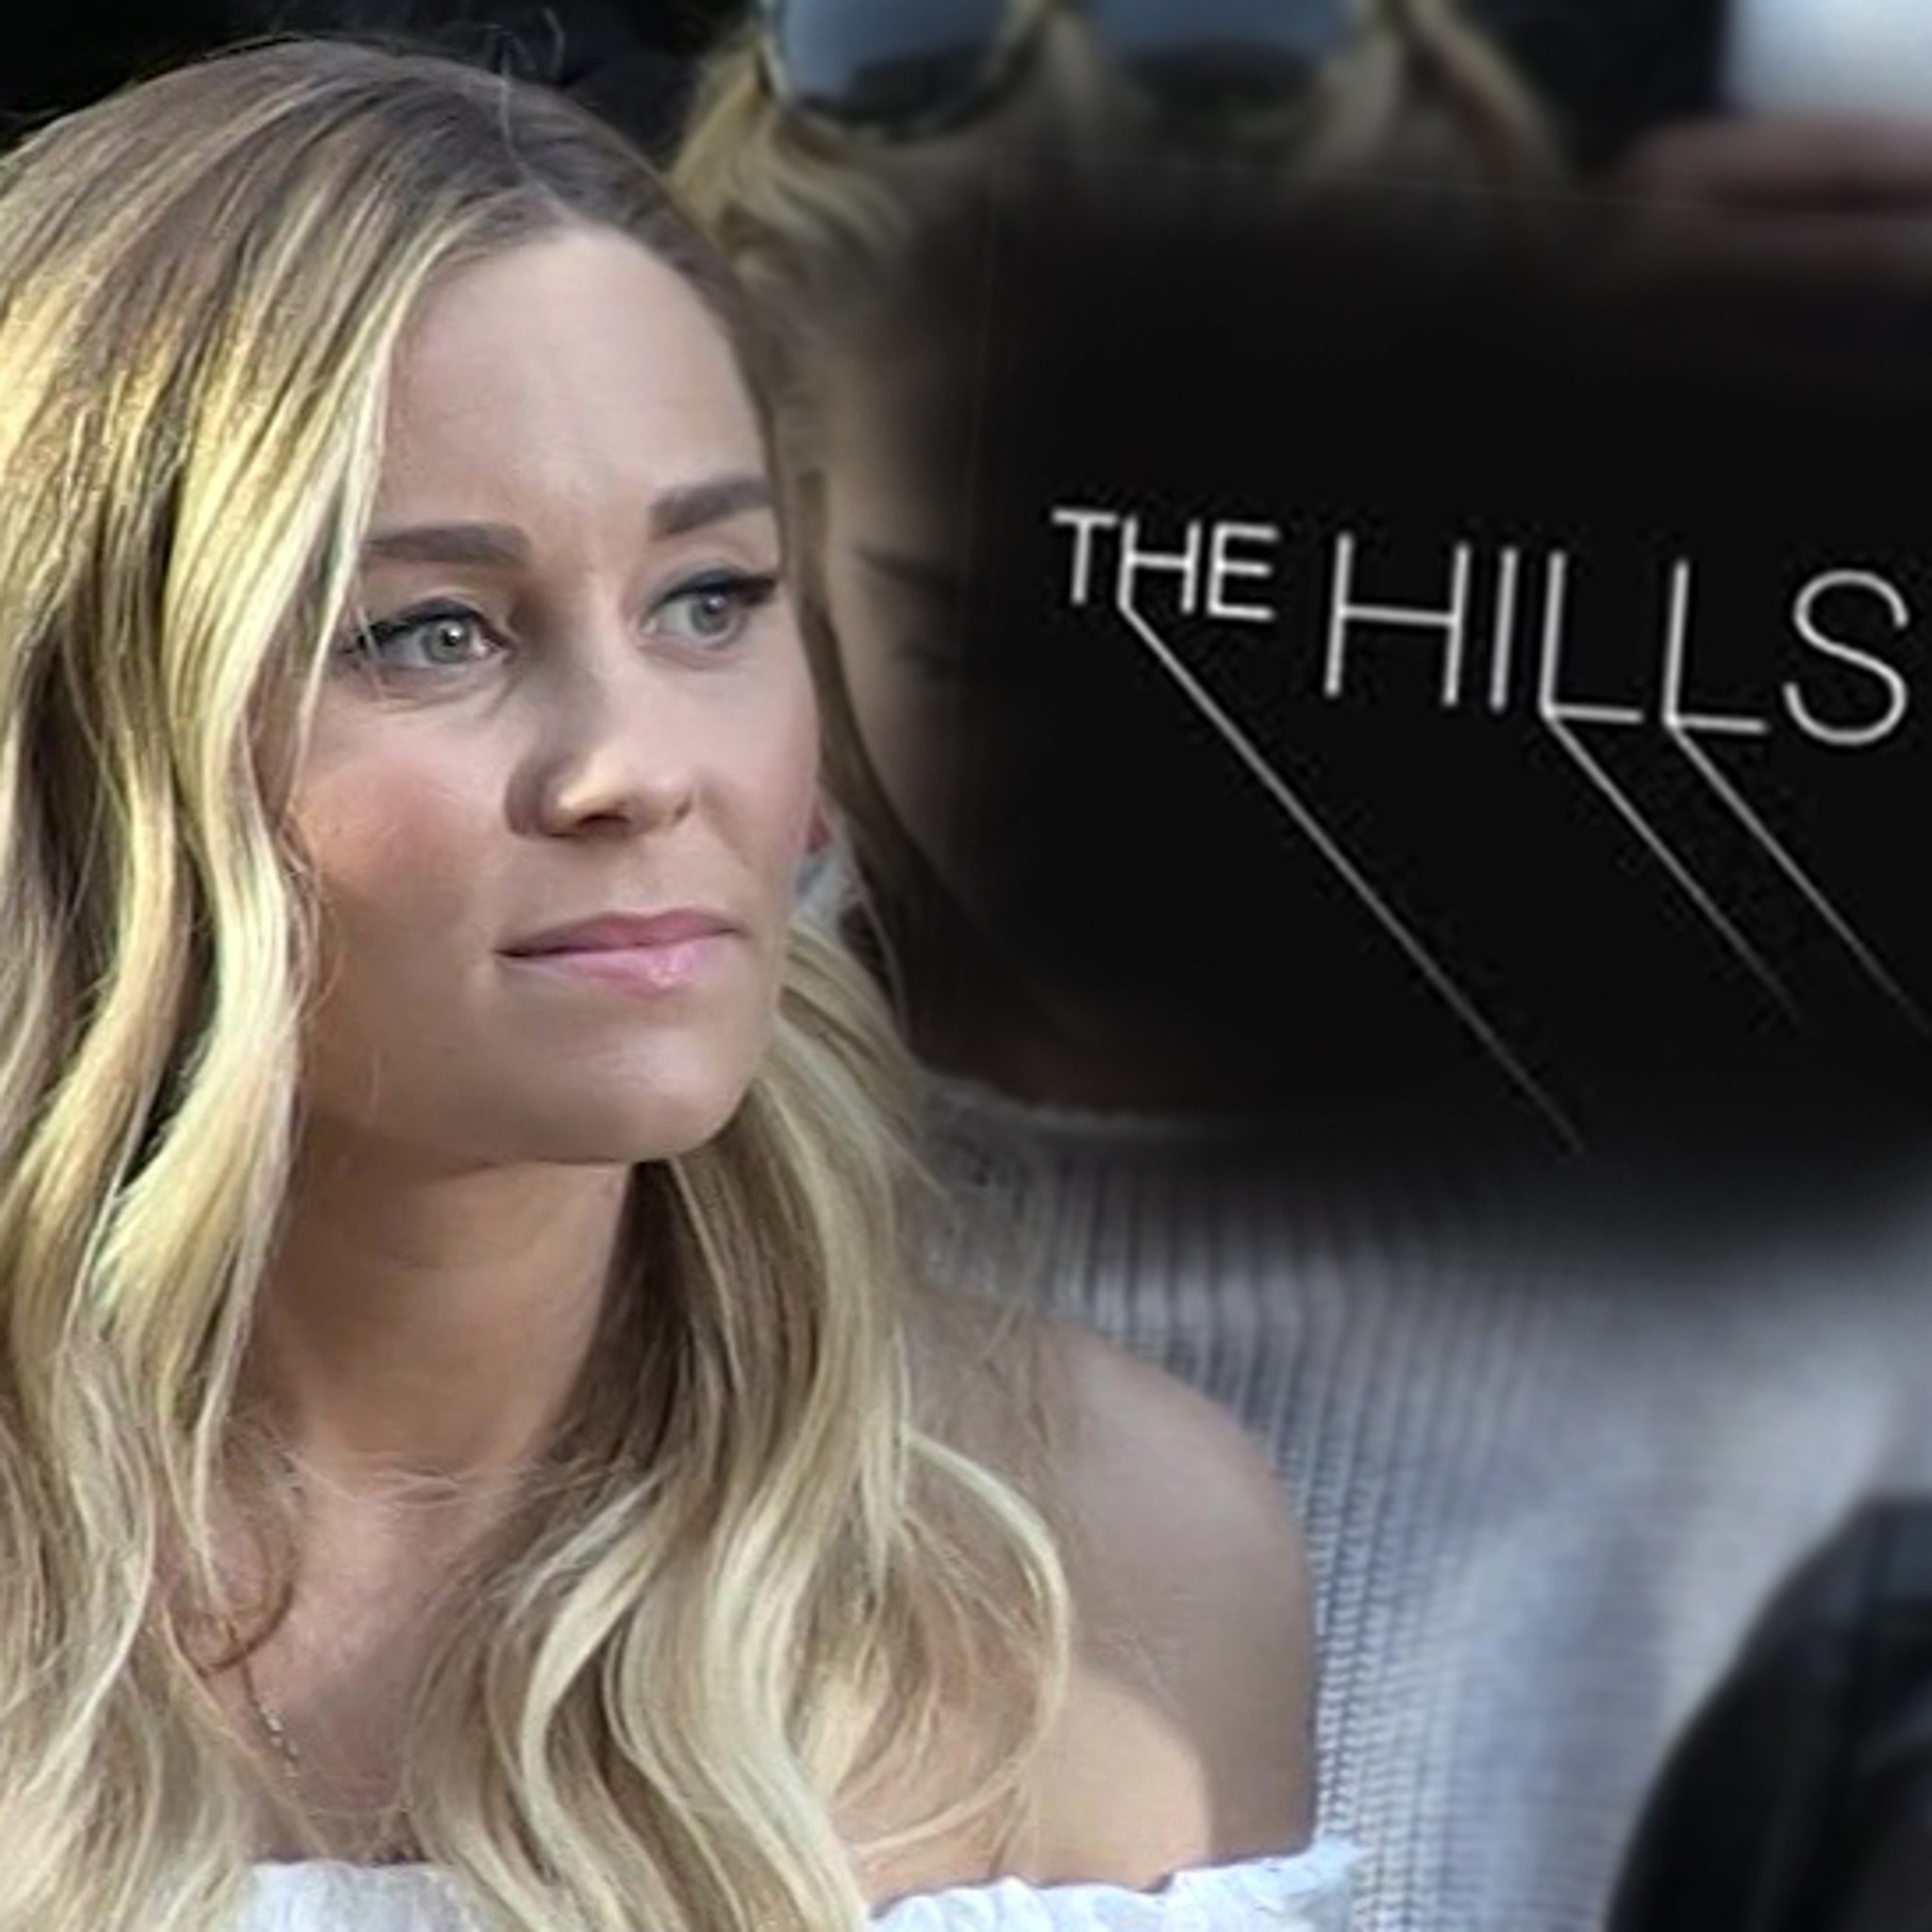 The Hills' Cast, Then and Now - What 'The Hills' Stars Are Up To